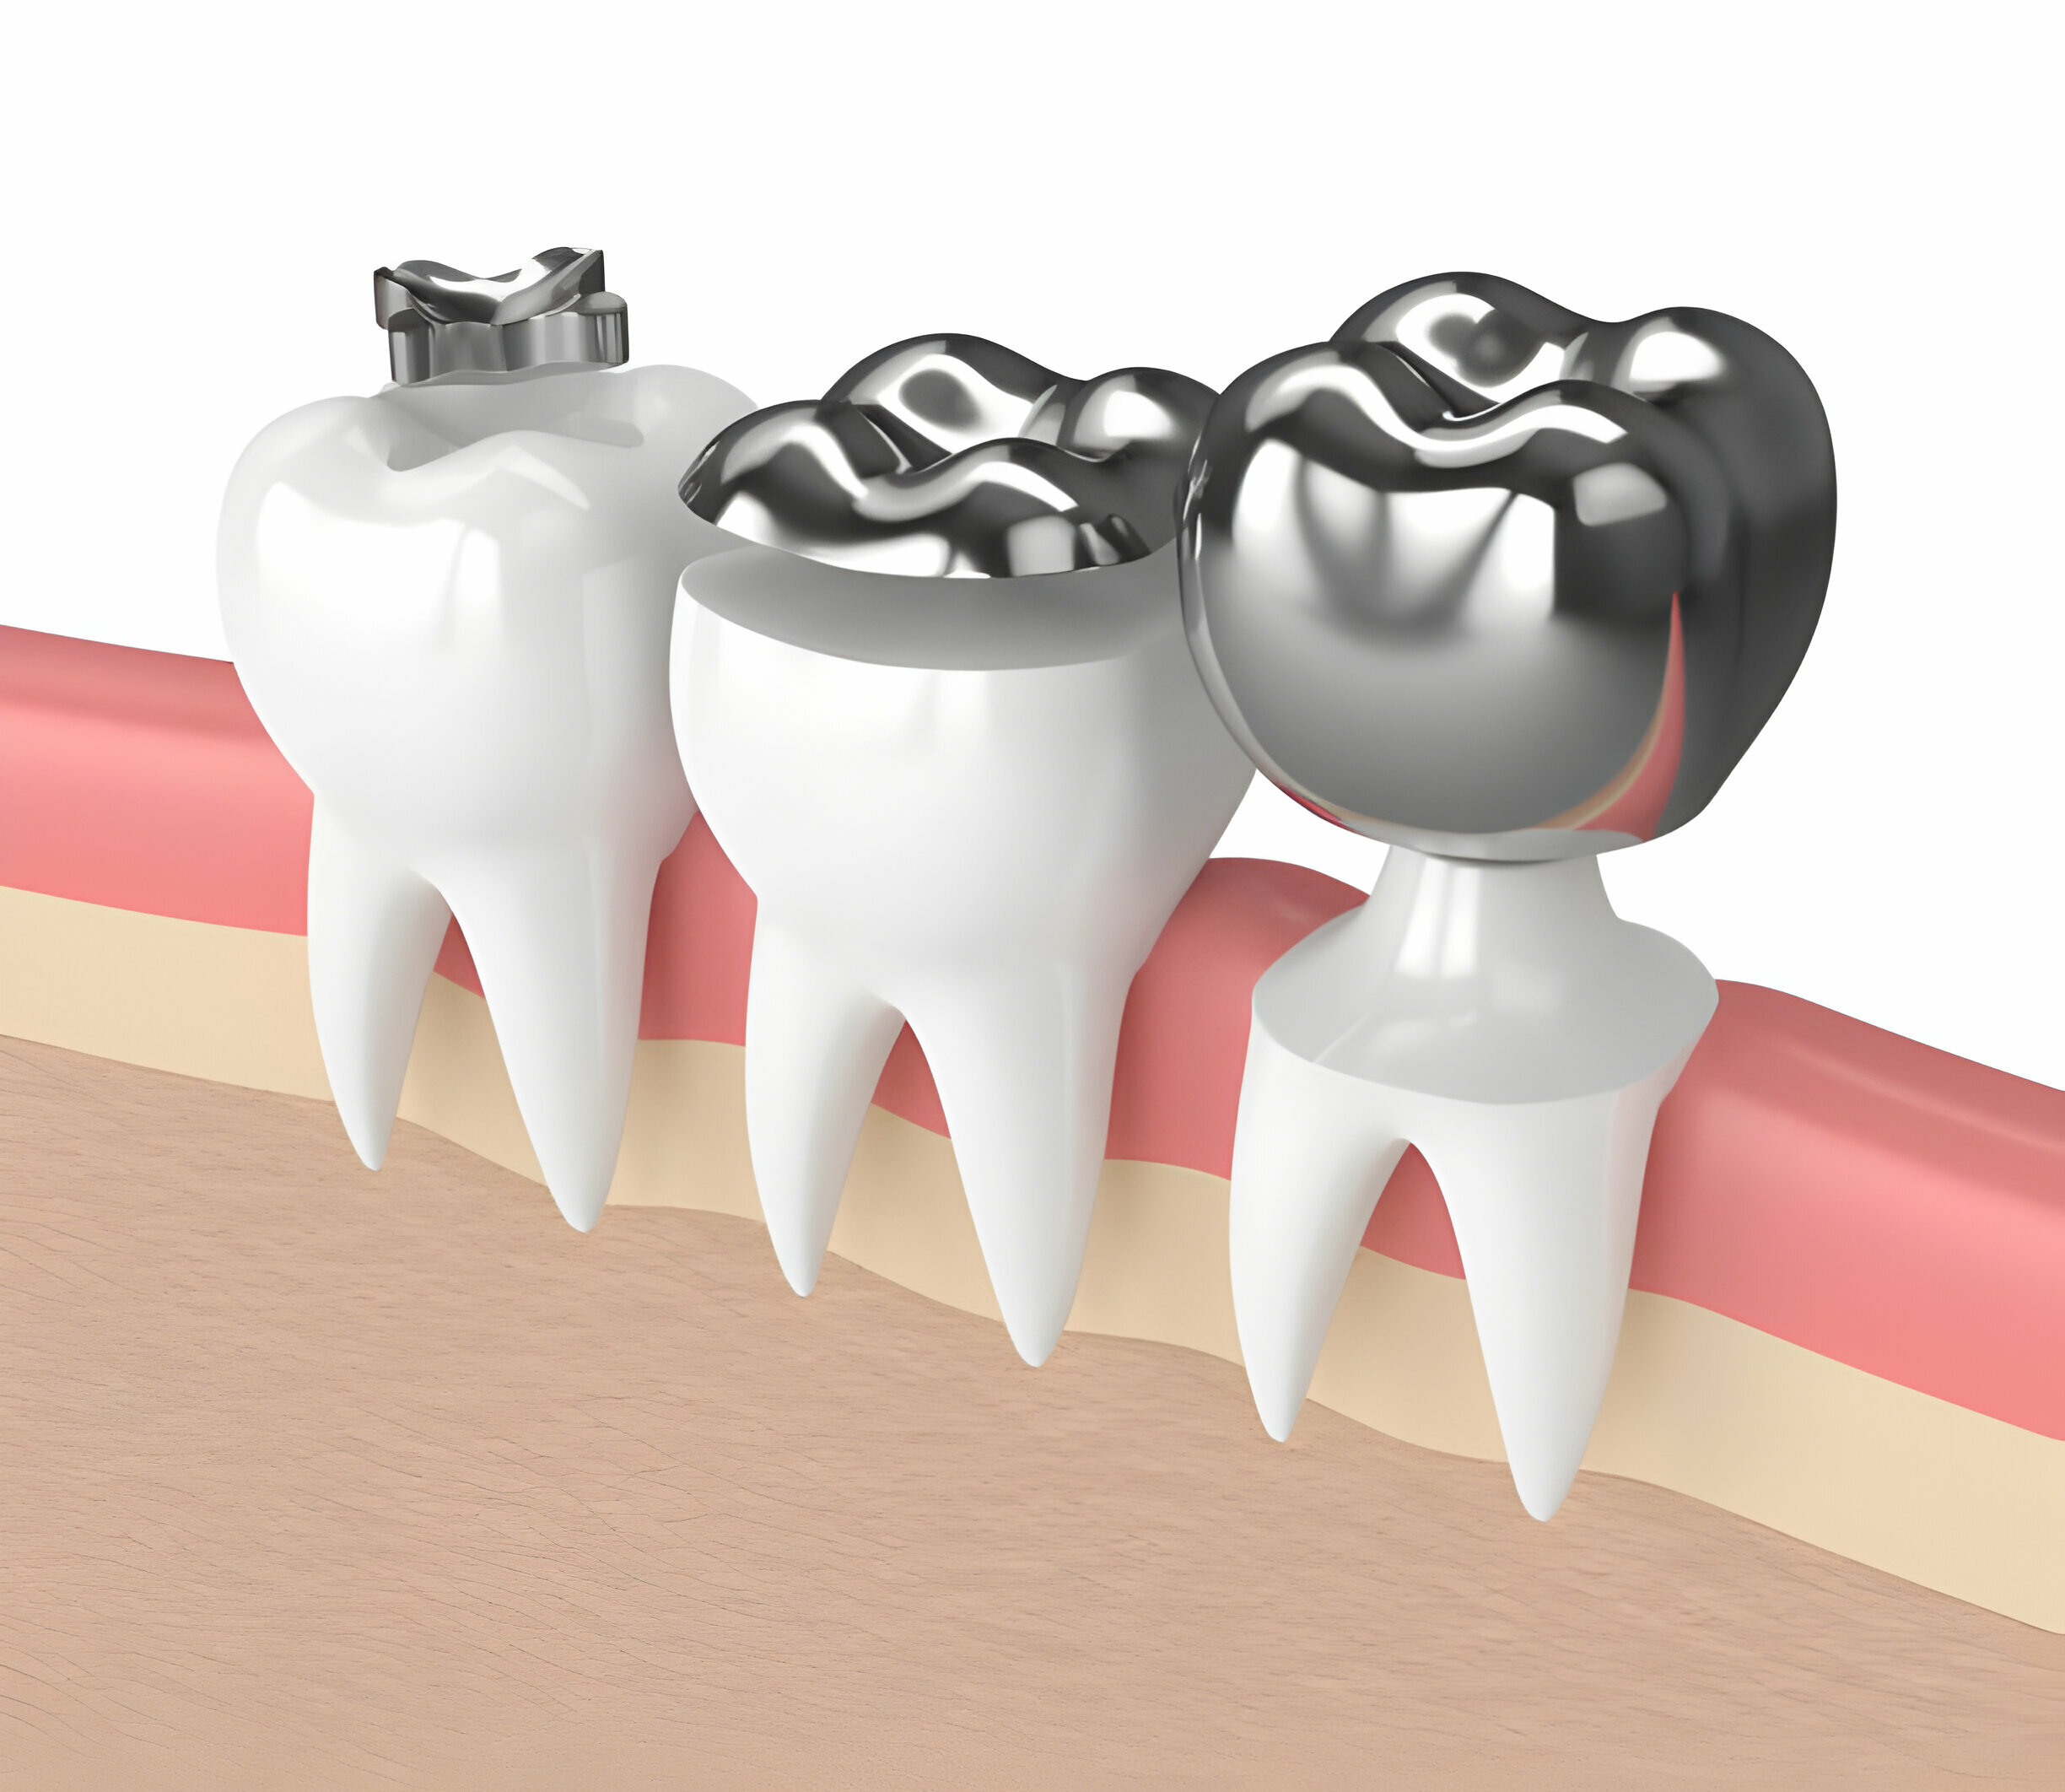 Maintaining Good Oral Hygiene After Getting A CEREC Crown_FI